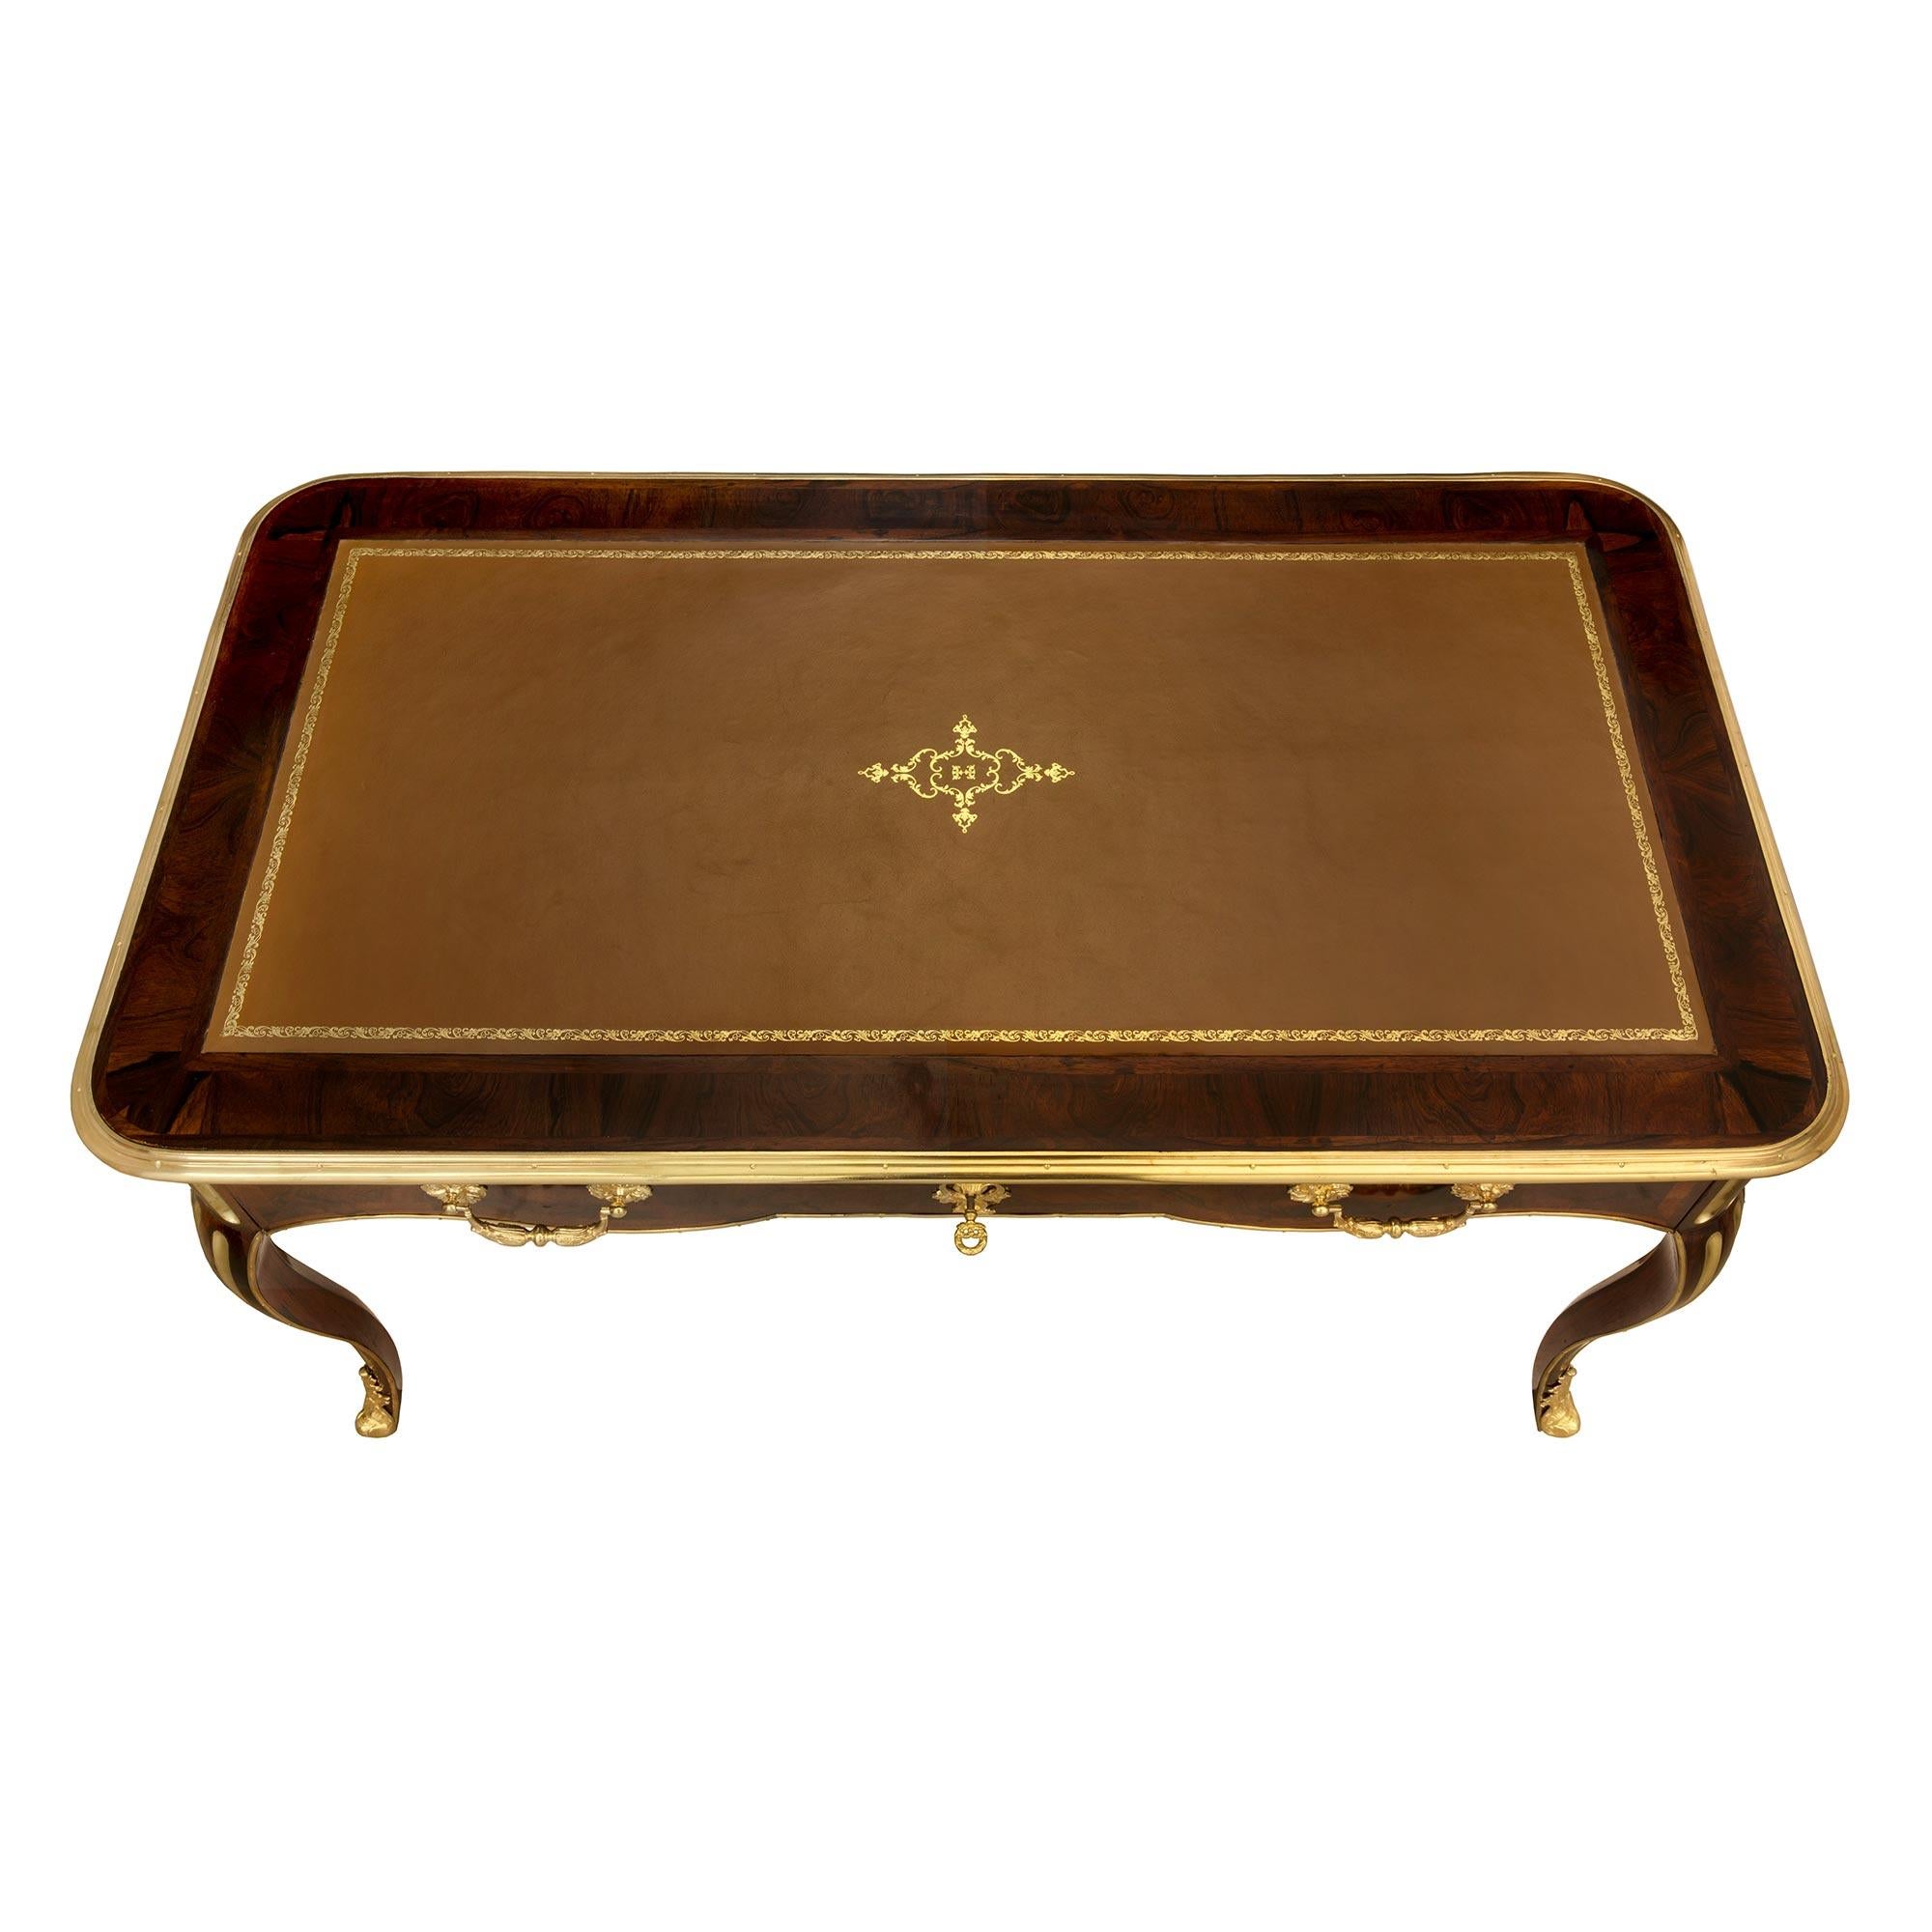 An extremely elegant French 19th century Regence st. rosewood, ormolu and brass desk. The desk is raised by beautiful cabriole legs with most decorative flutes, fitted brass chandelles and fine foliate ormolu sabots. The scalloped shaped frieze